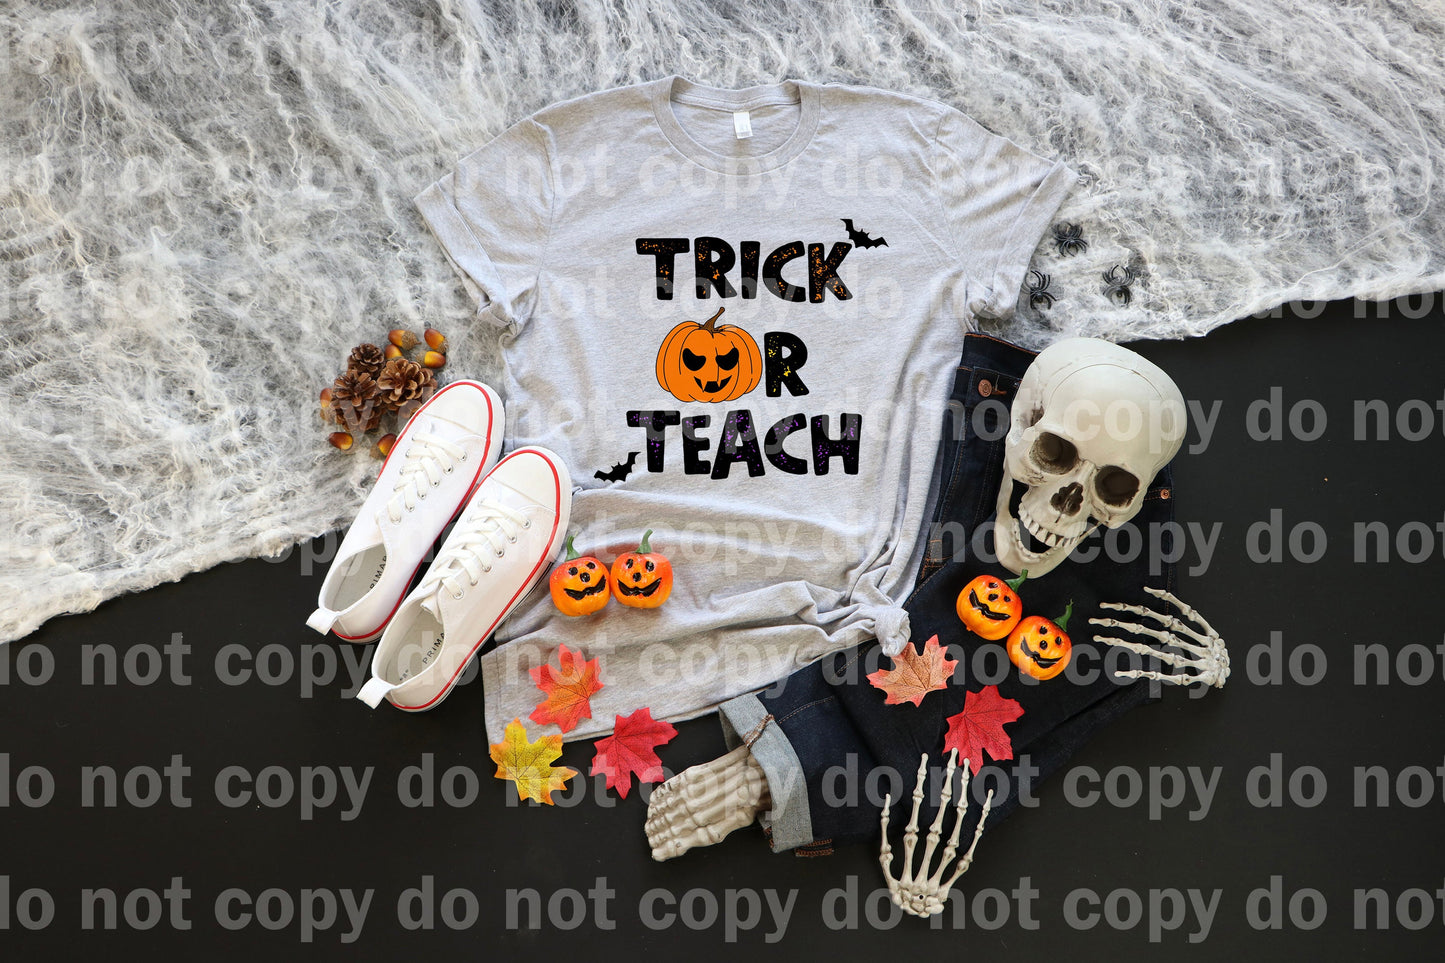 Trick or Teach Full Color/One Color Dream Print or Sublimation Print